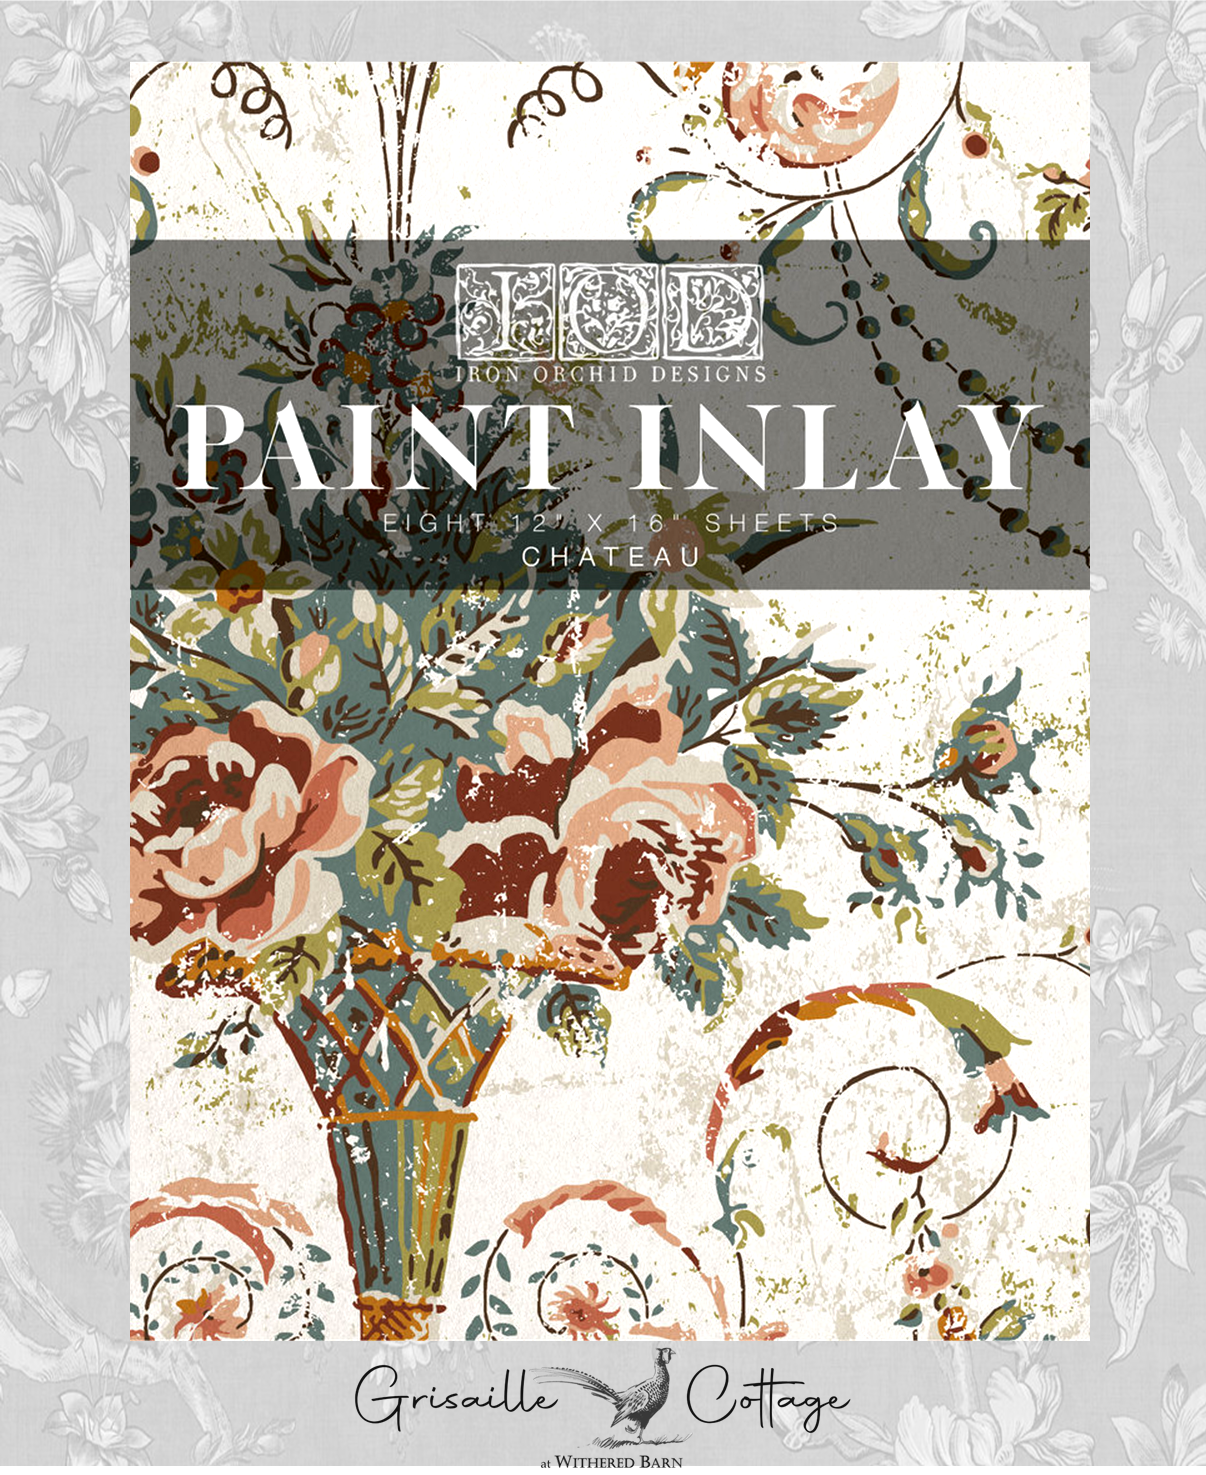 Chateau - IOD Paint Inlay™ LIMITED EDITION